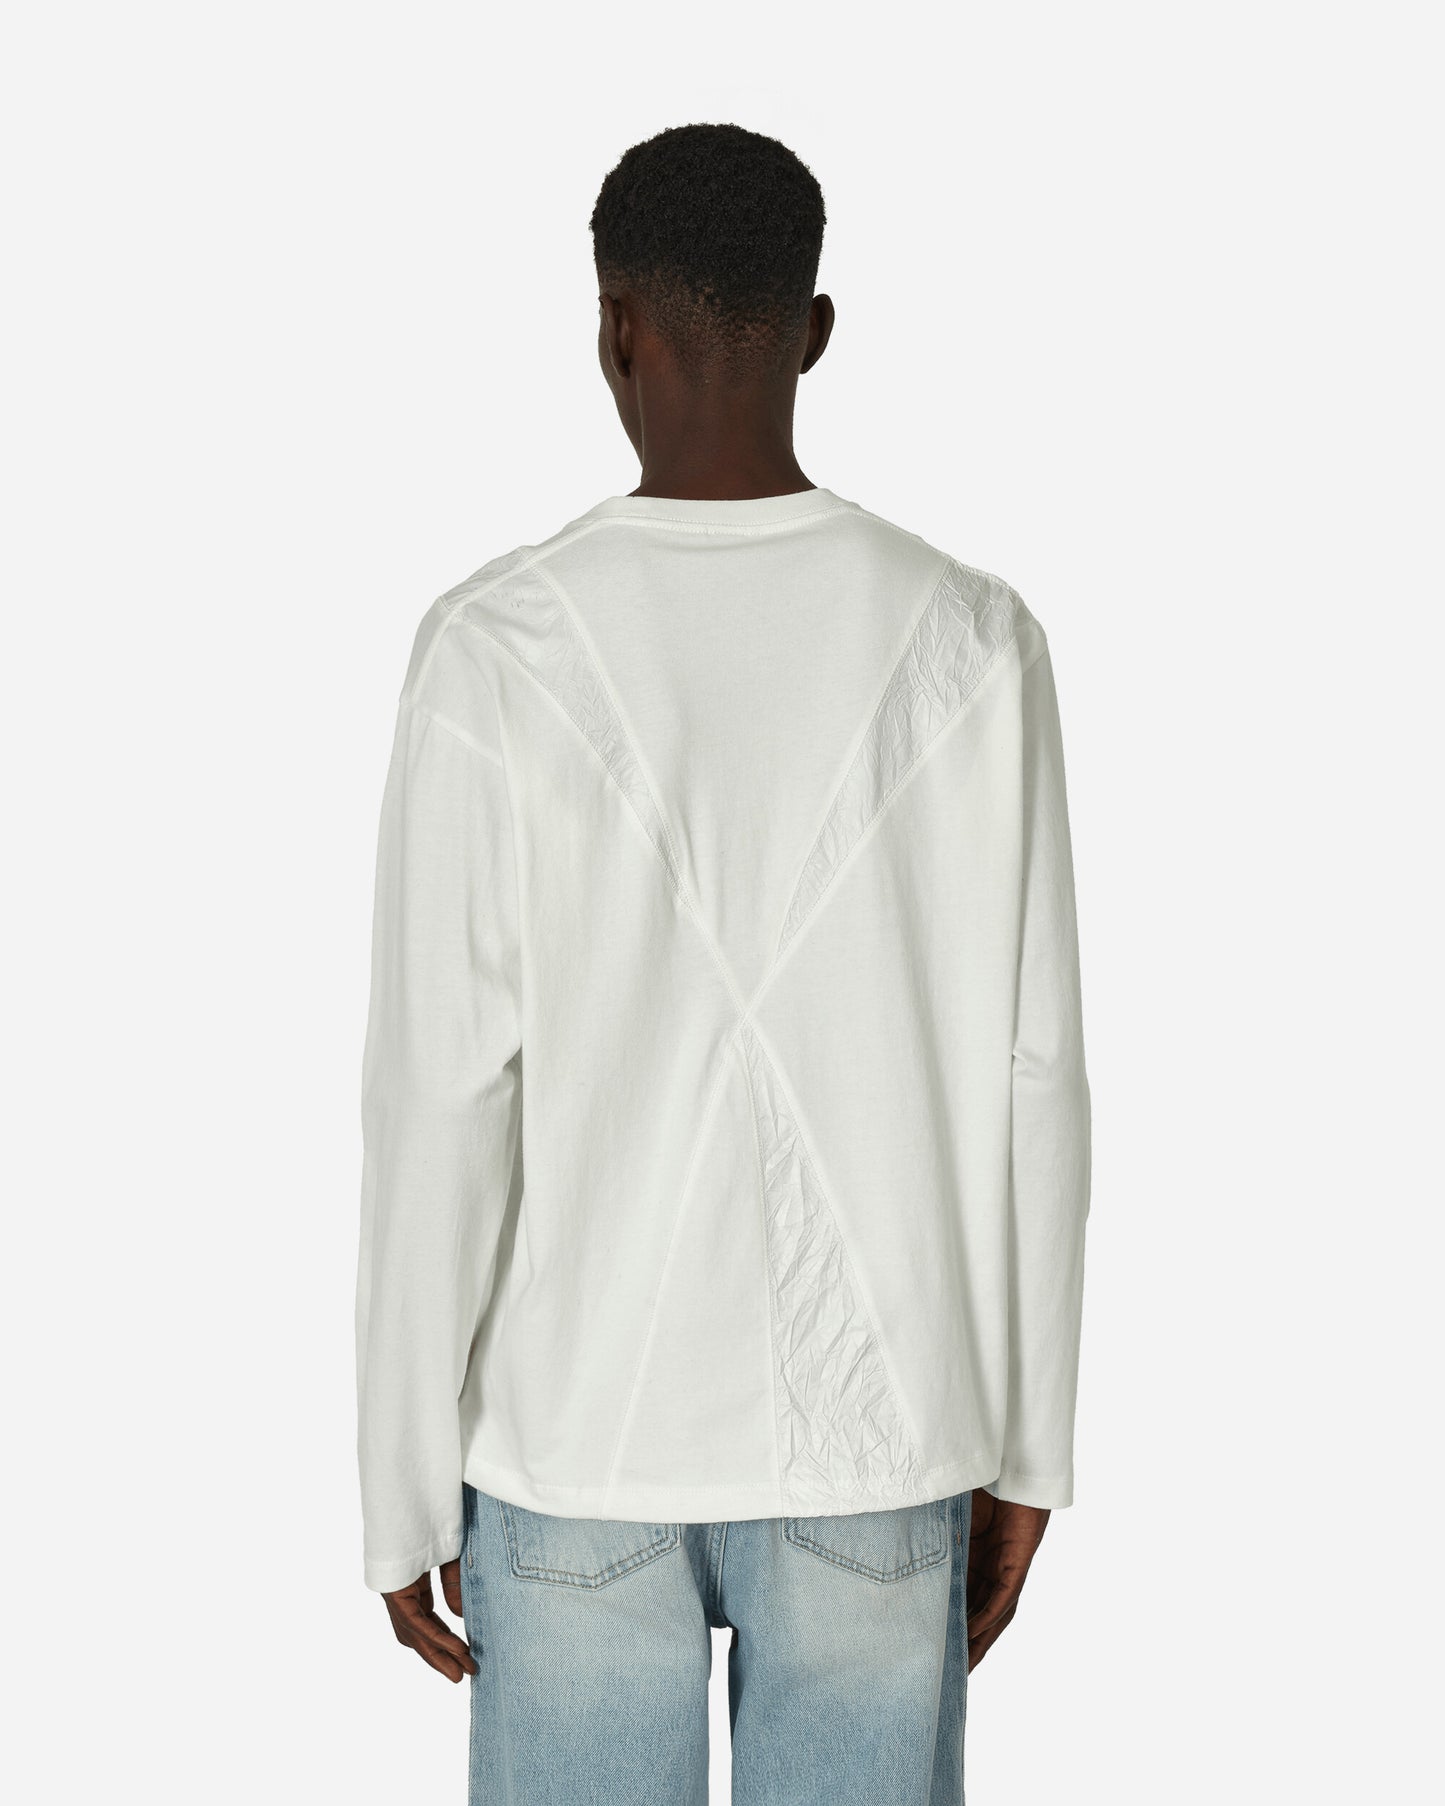 Unaffected Wrinkled Panel Long Sleeves Off White T-Shirts Longsleeve UN23FWCS06 001